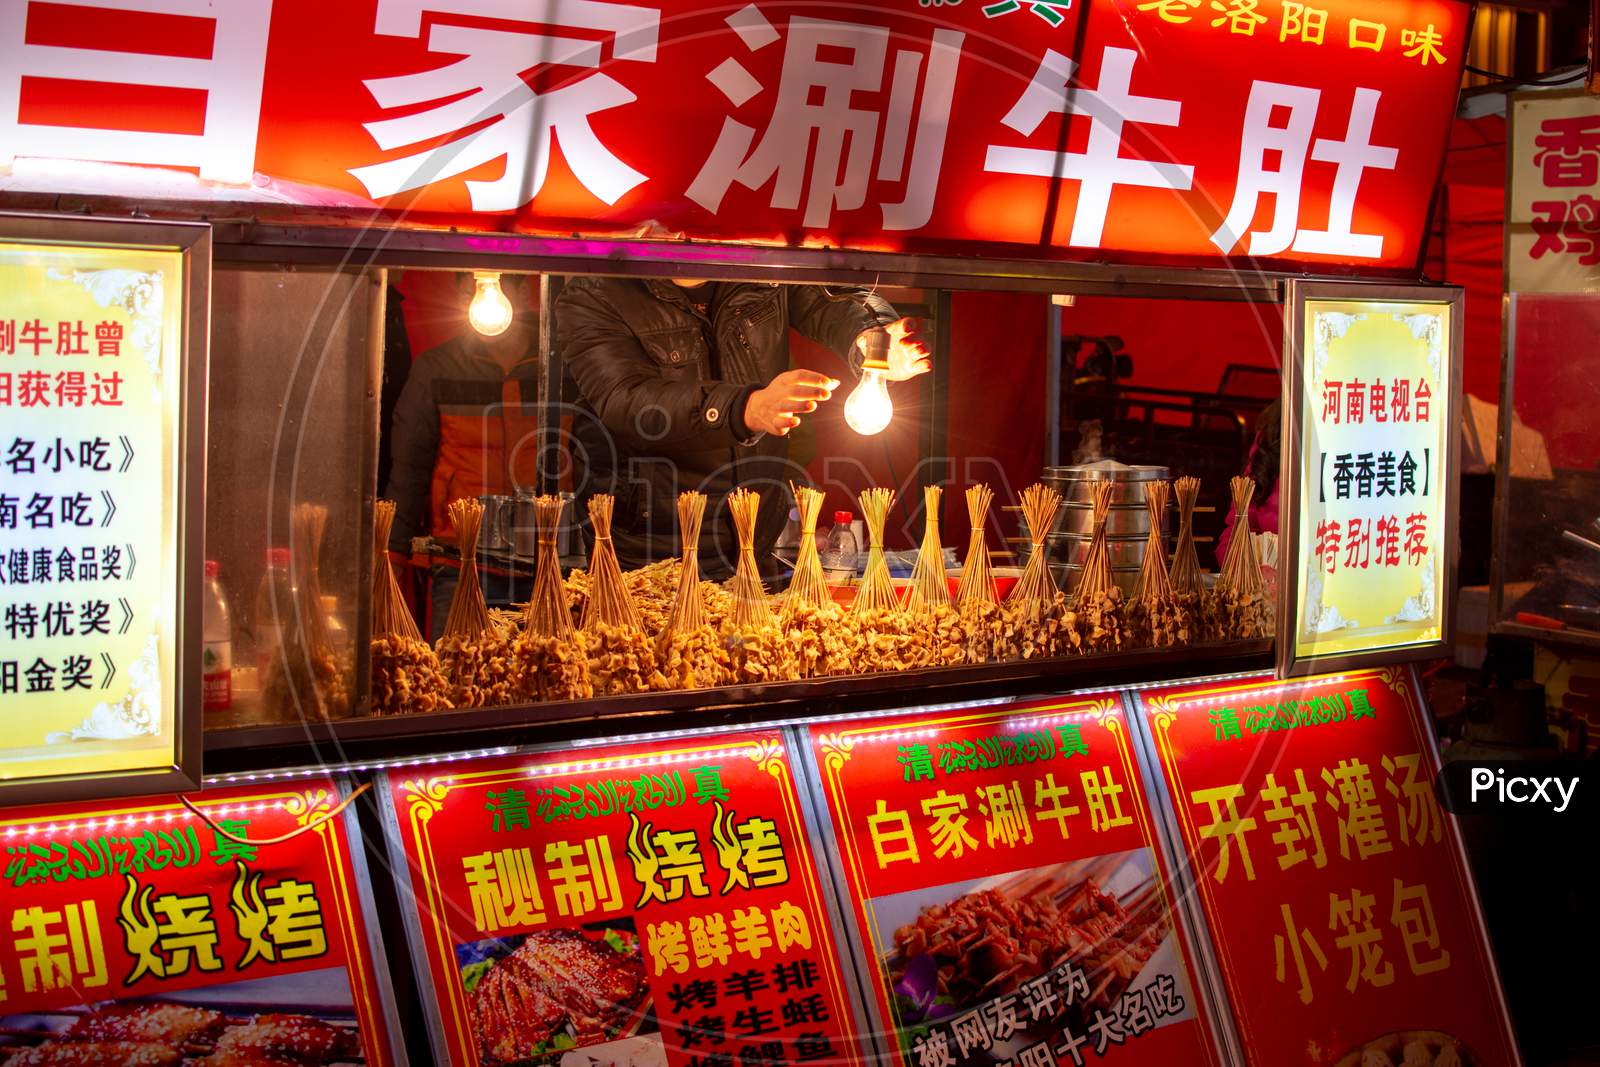 Street Market Food Stall In Luoyang Old City In Henan, China